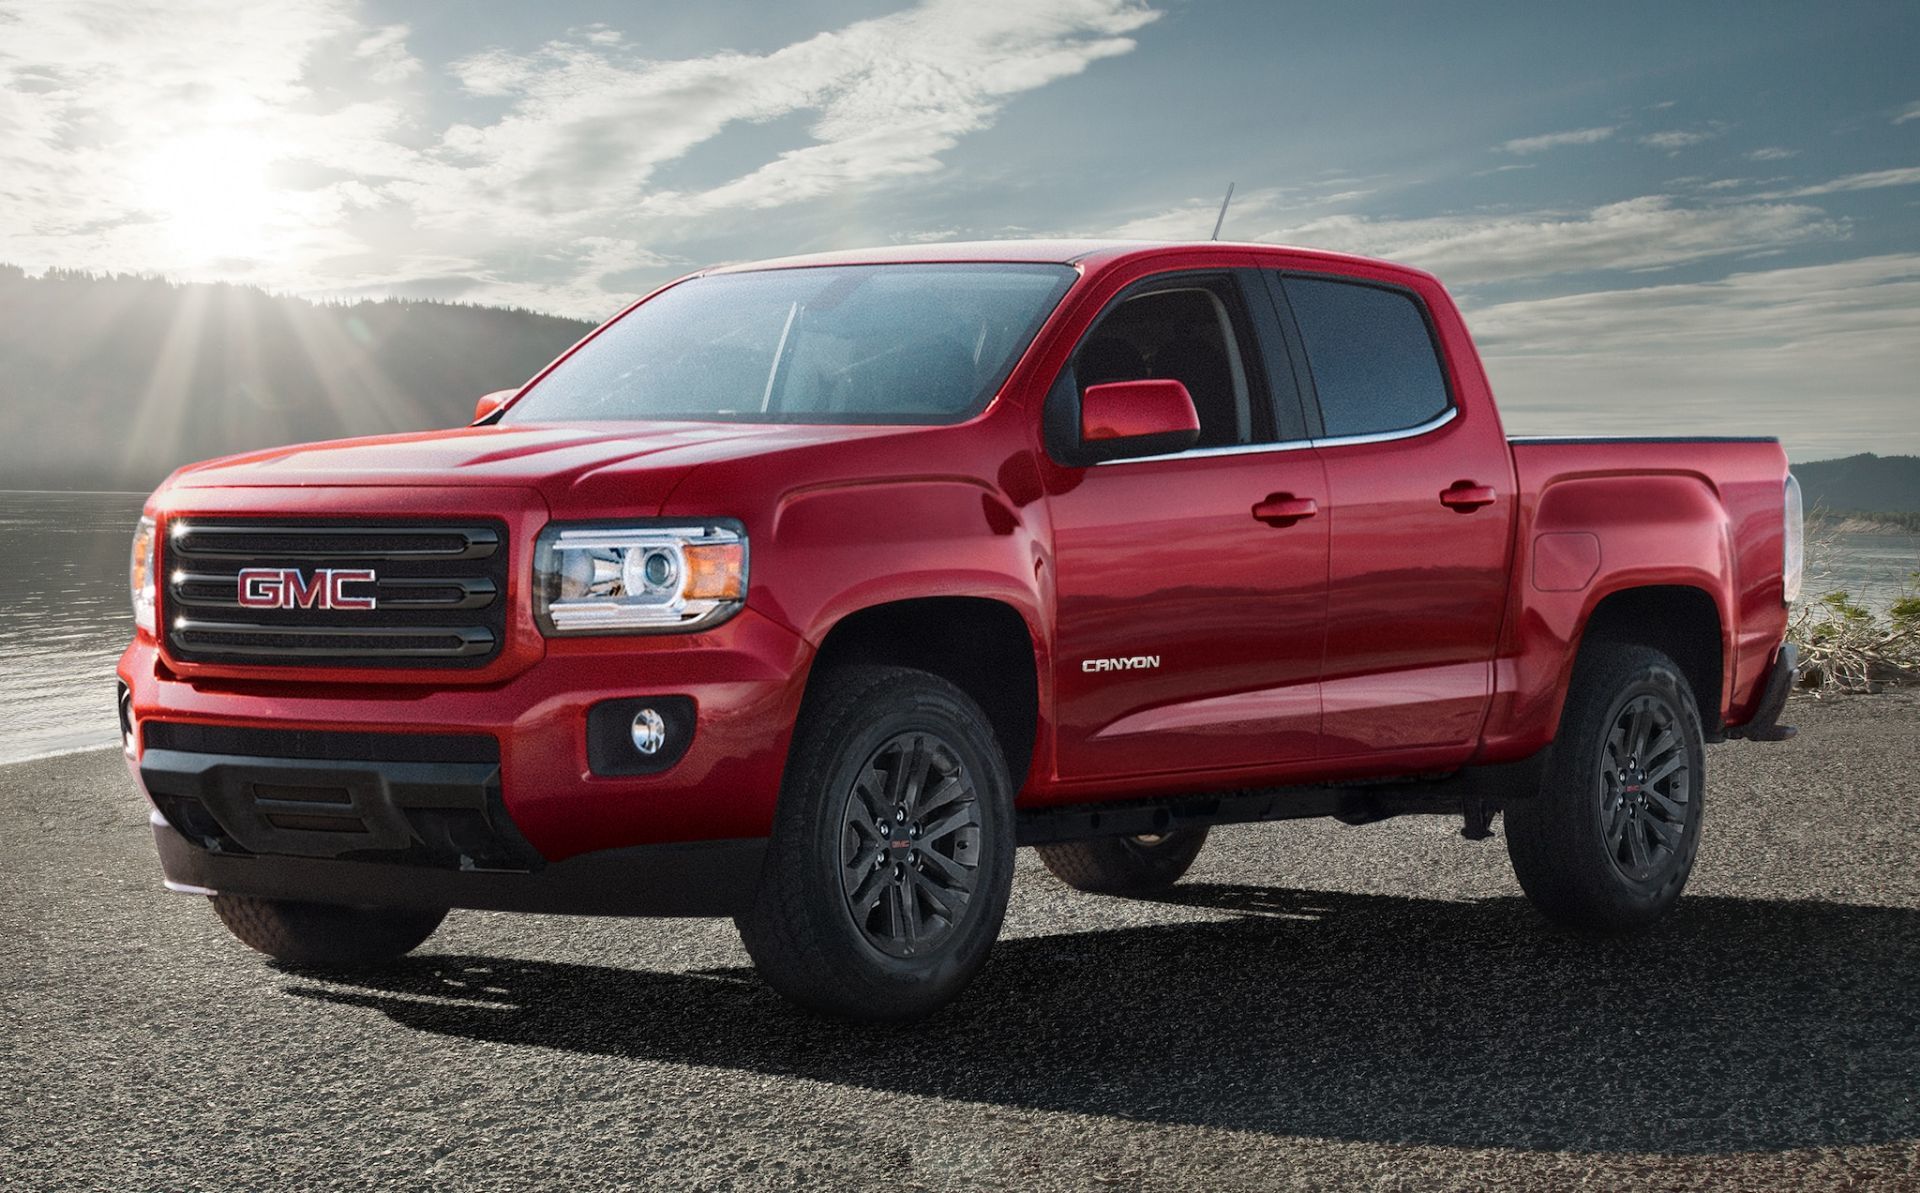 2019 GMC Canyon: This Is Professional Grade